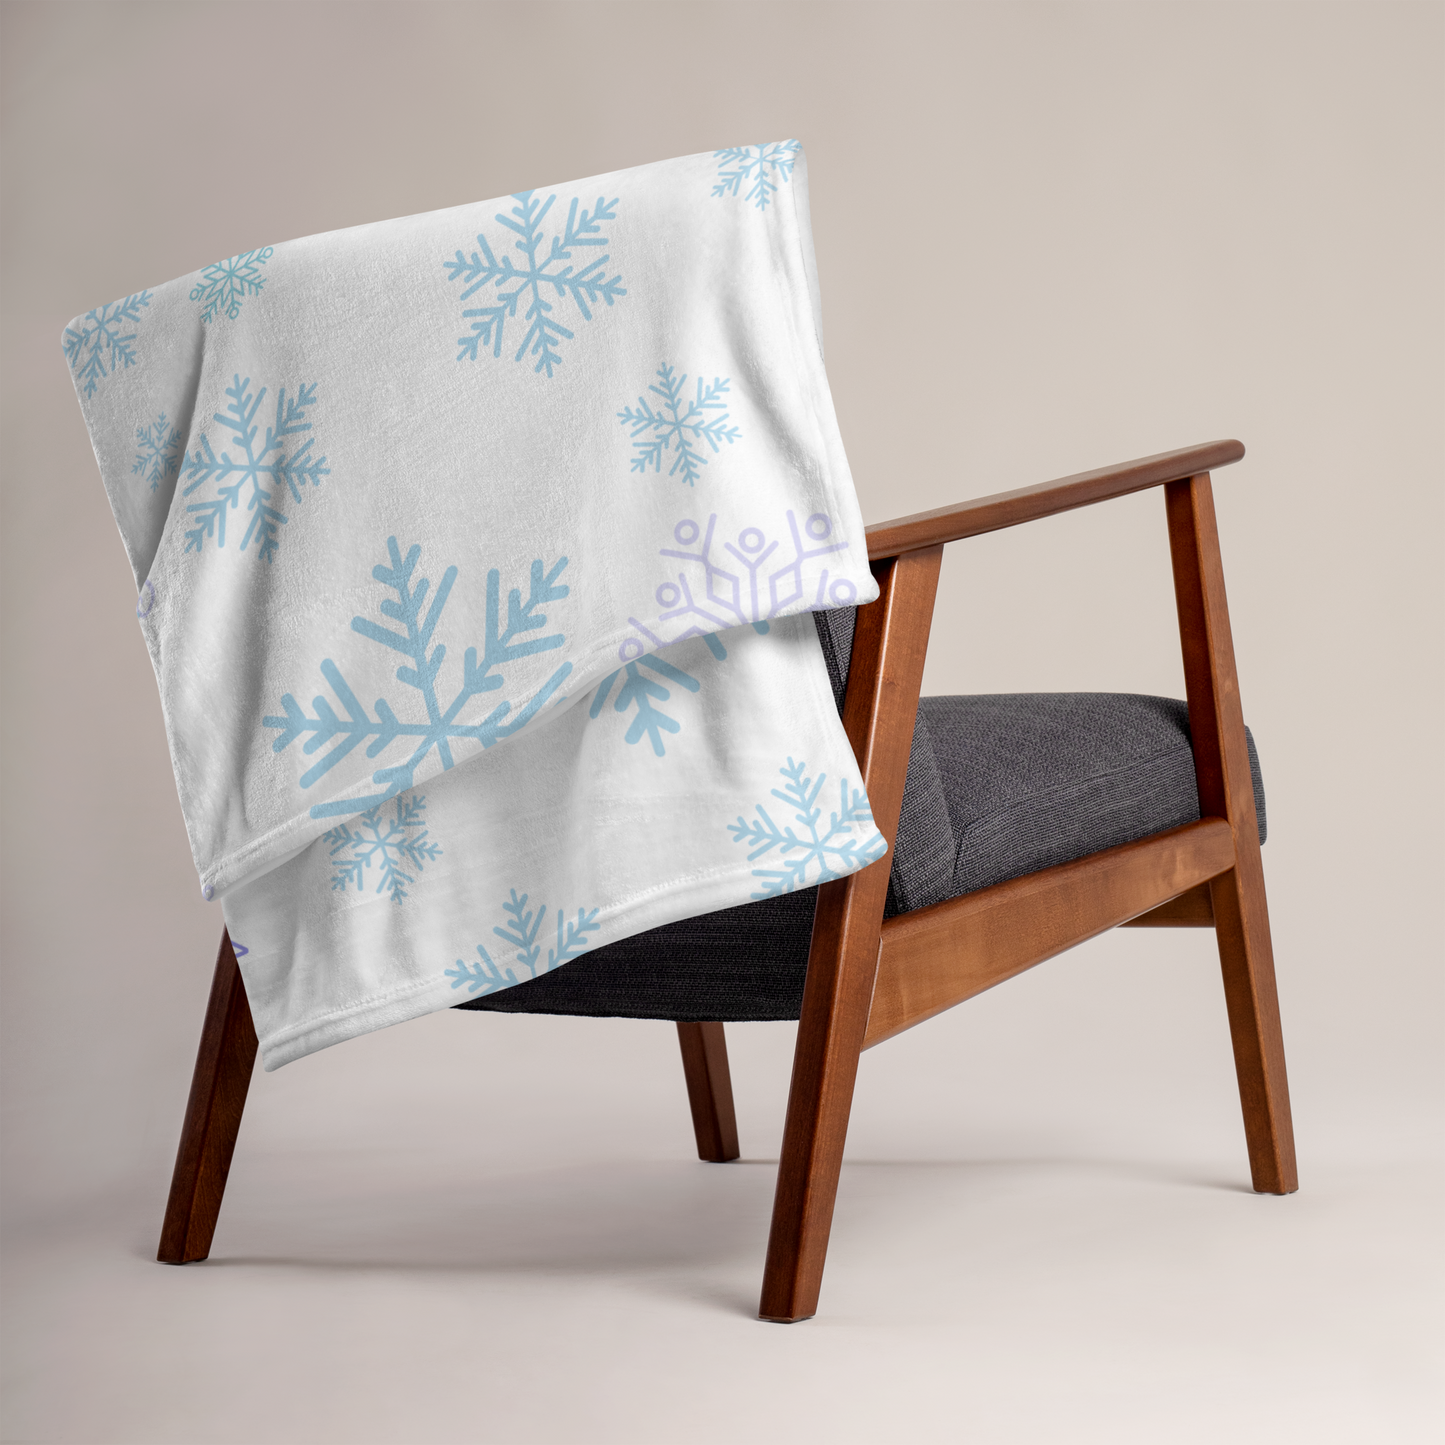 Soft-Touch Throw Blanket: Winter Snowfall